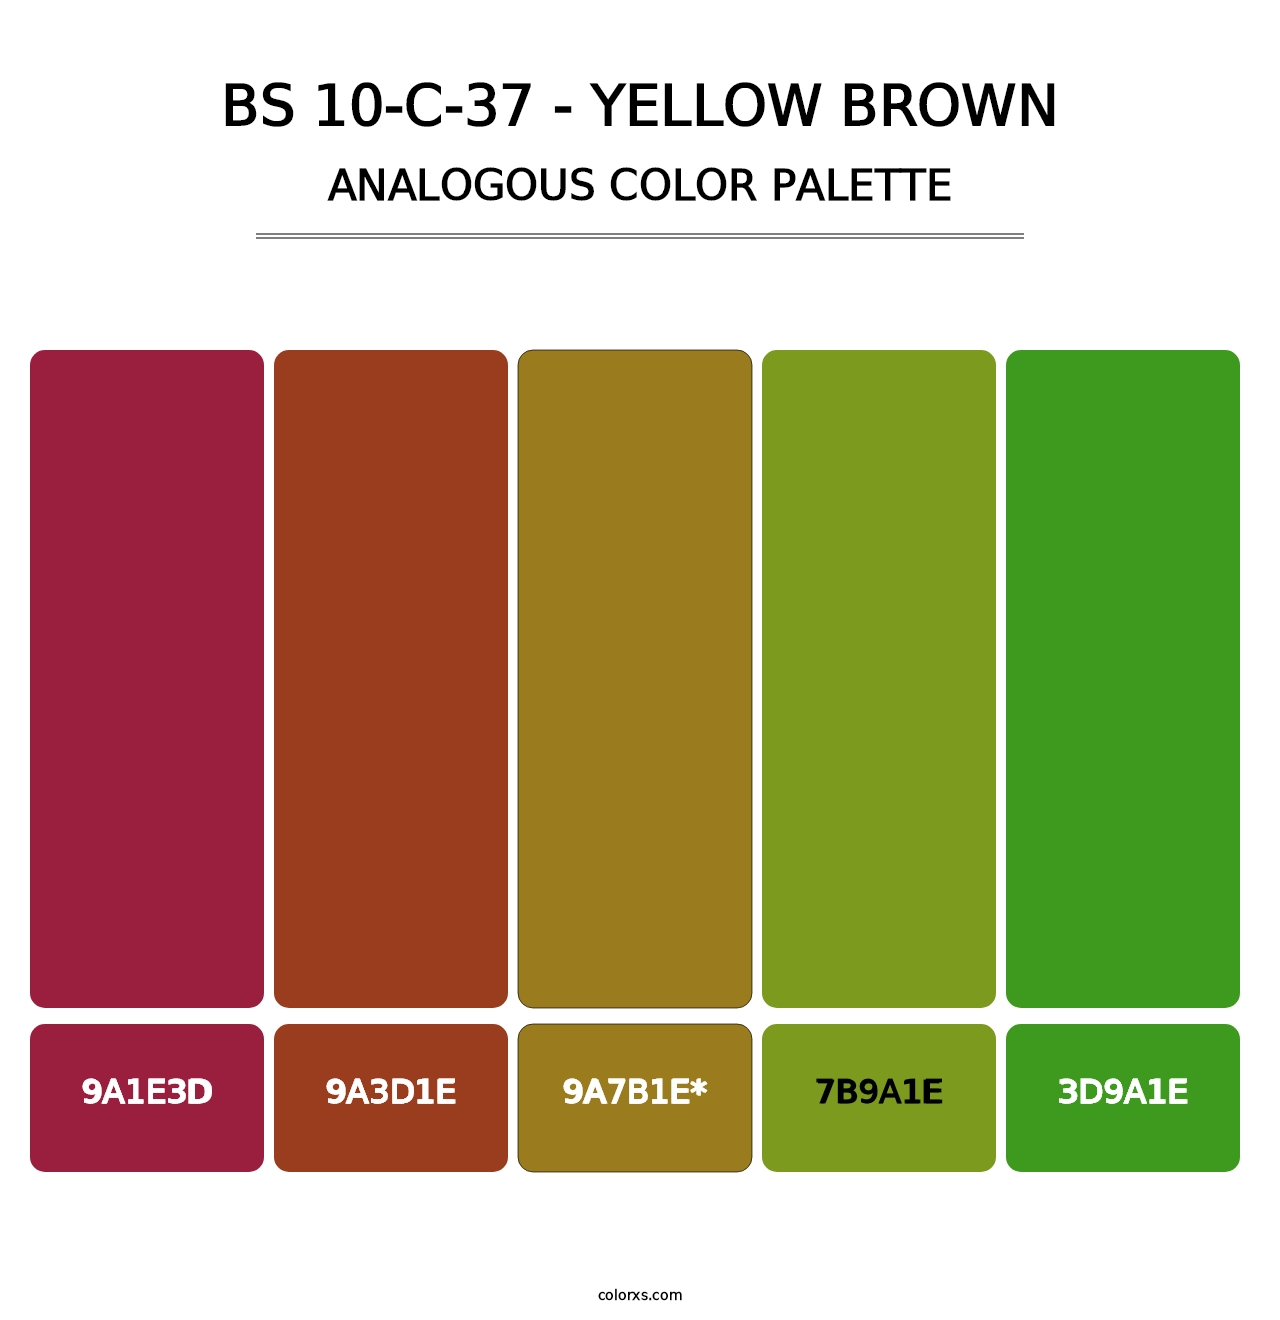 BS 10-C-37 - Yellow Brown - Analogous Color Palette